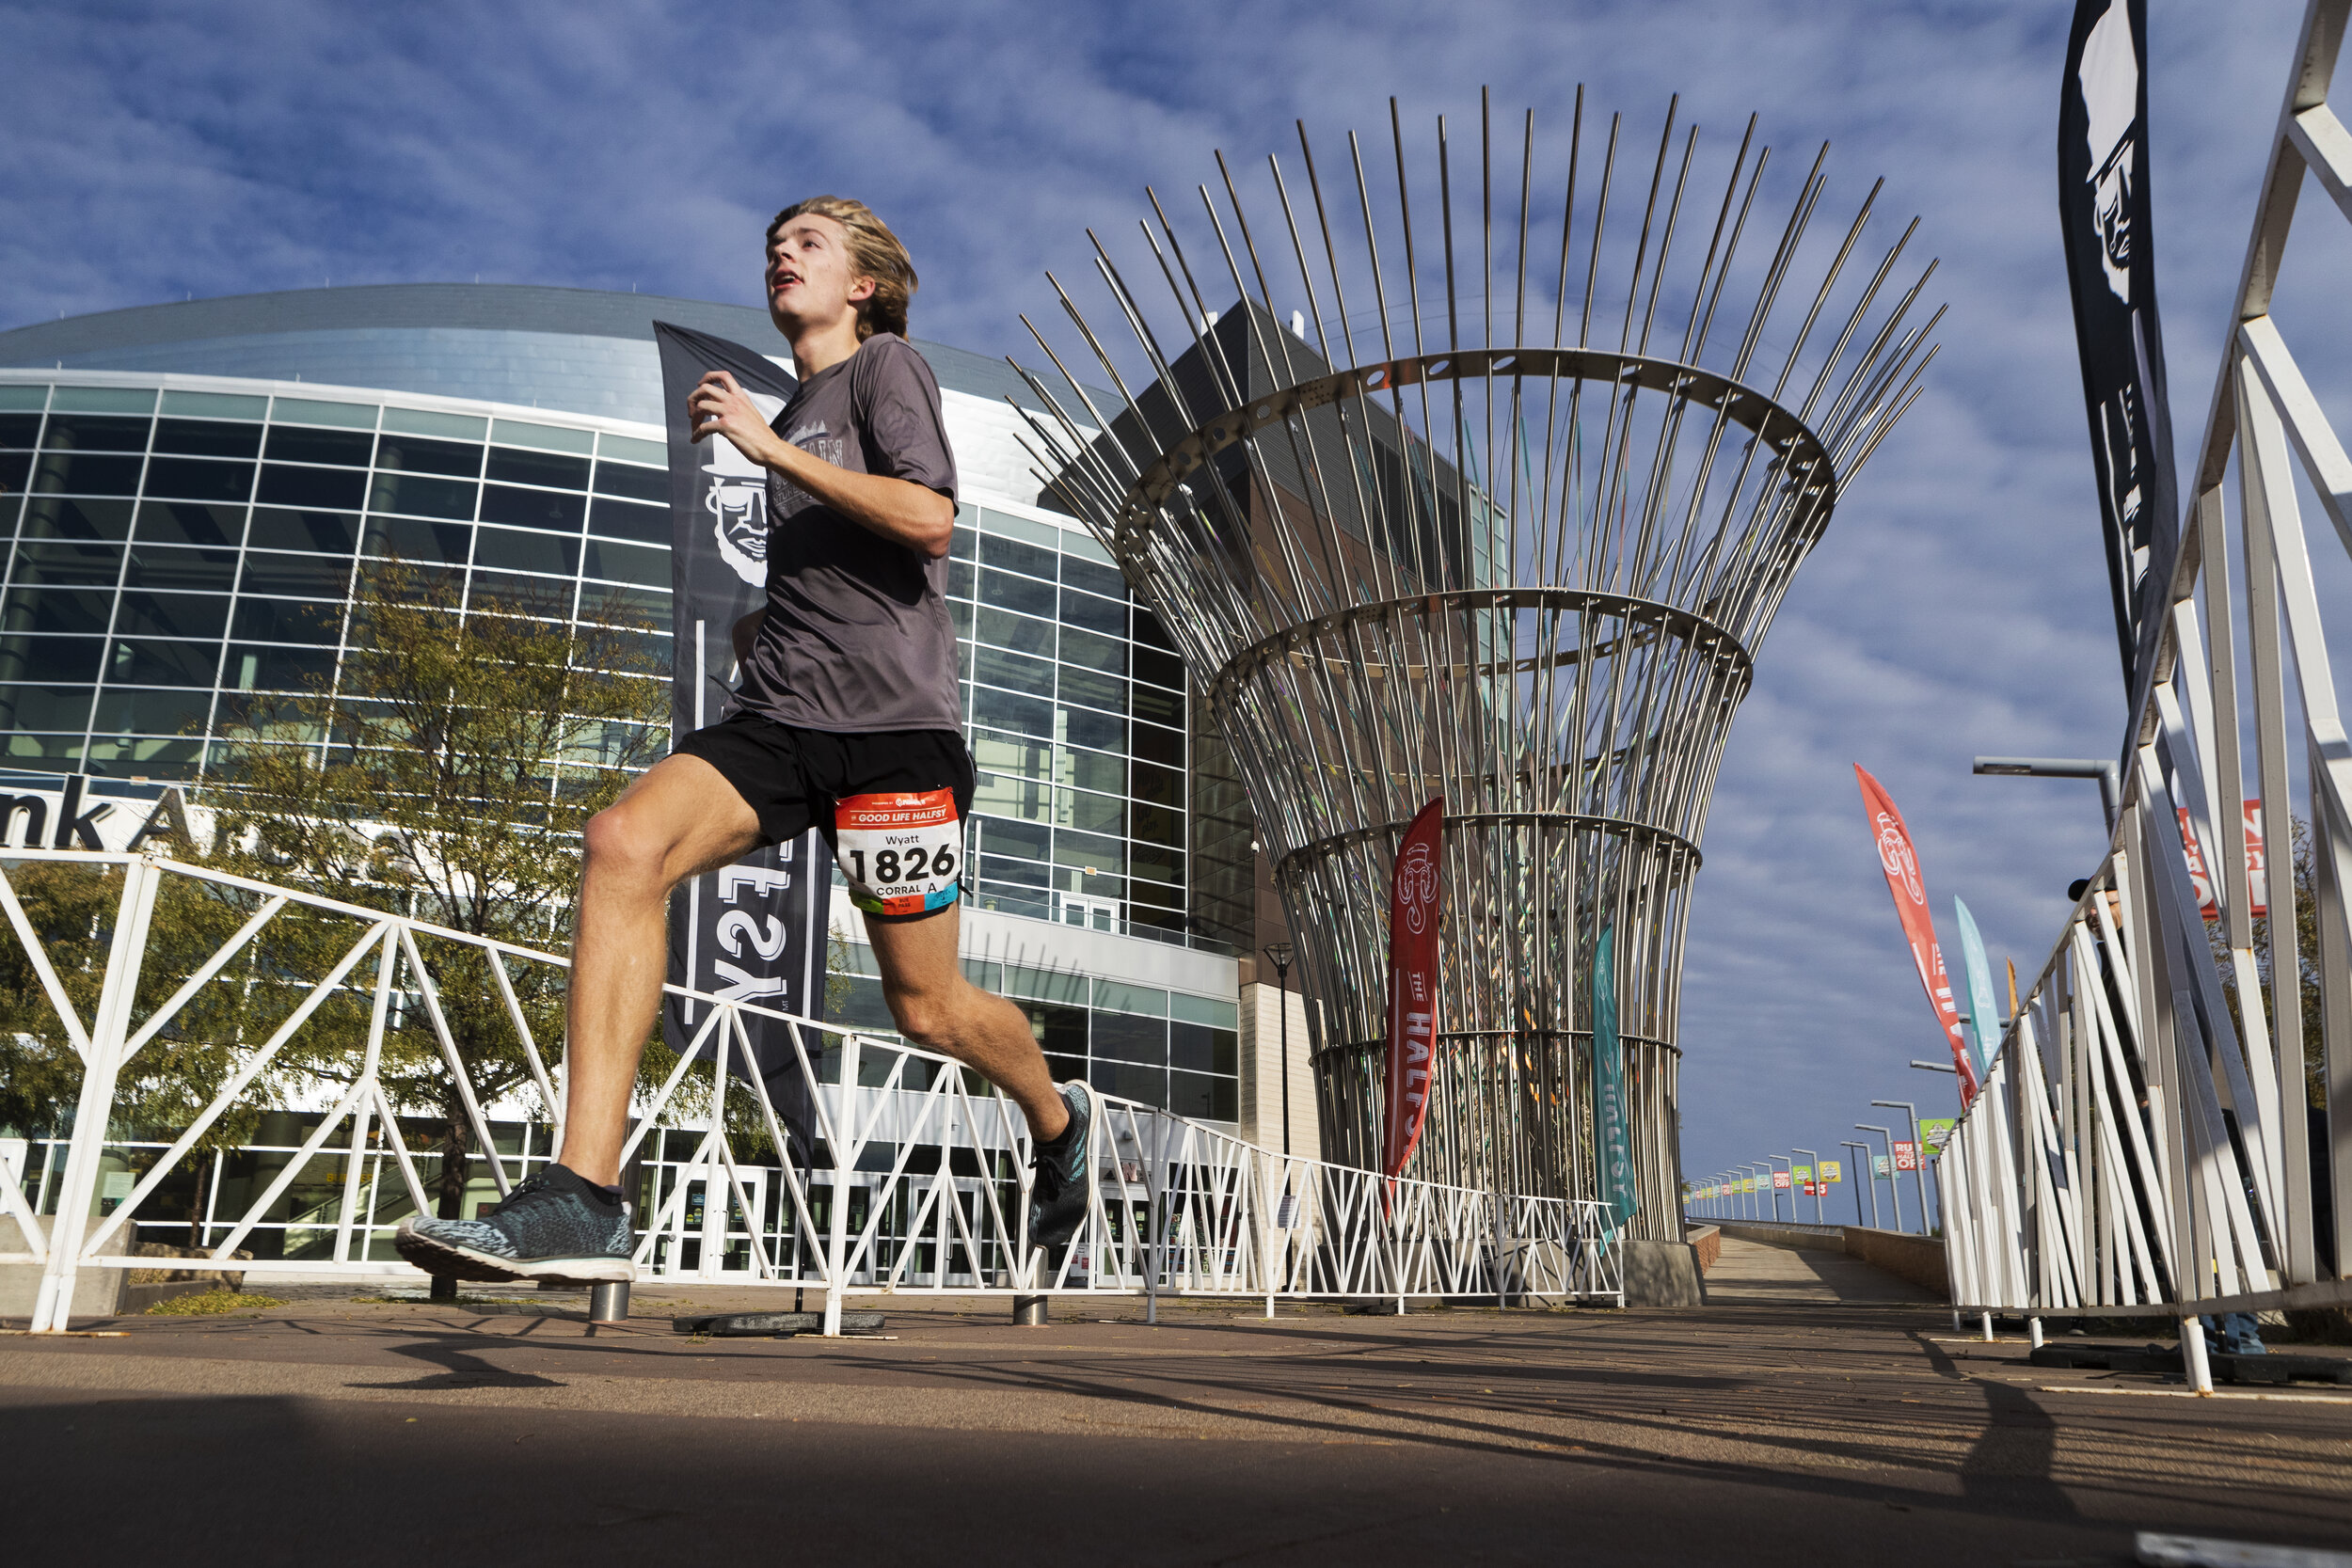  Wyatt Pearlman, from Roeland Park, Kansas, sprints past Pinnacle Bank Arena to the finish line in the Railyard finishing 27th during the Good Life Halfsy on Sunday, November 01, 2020, in Lincoln, Nebraska. Kenneth Ferriera, JOURNAL STAR. 